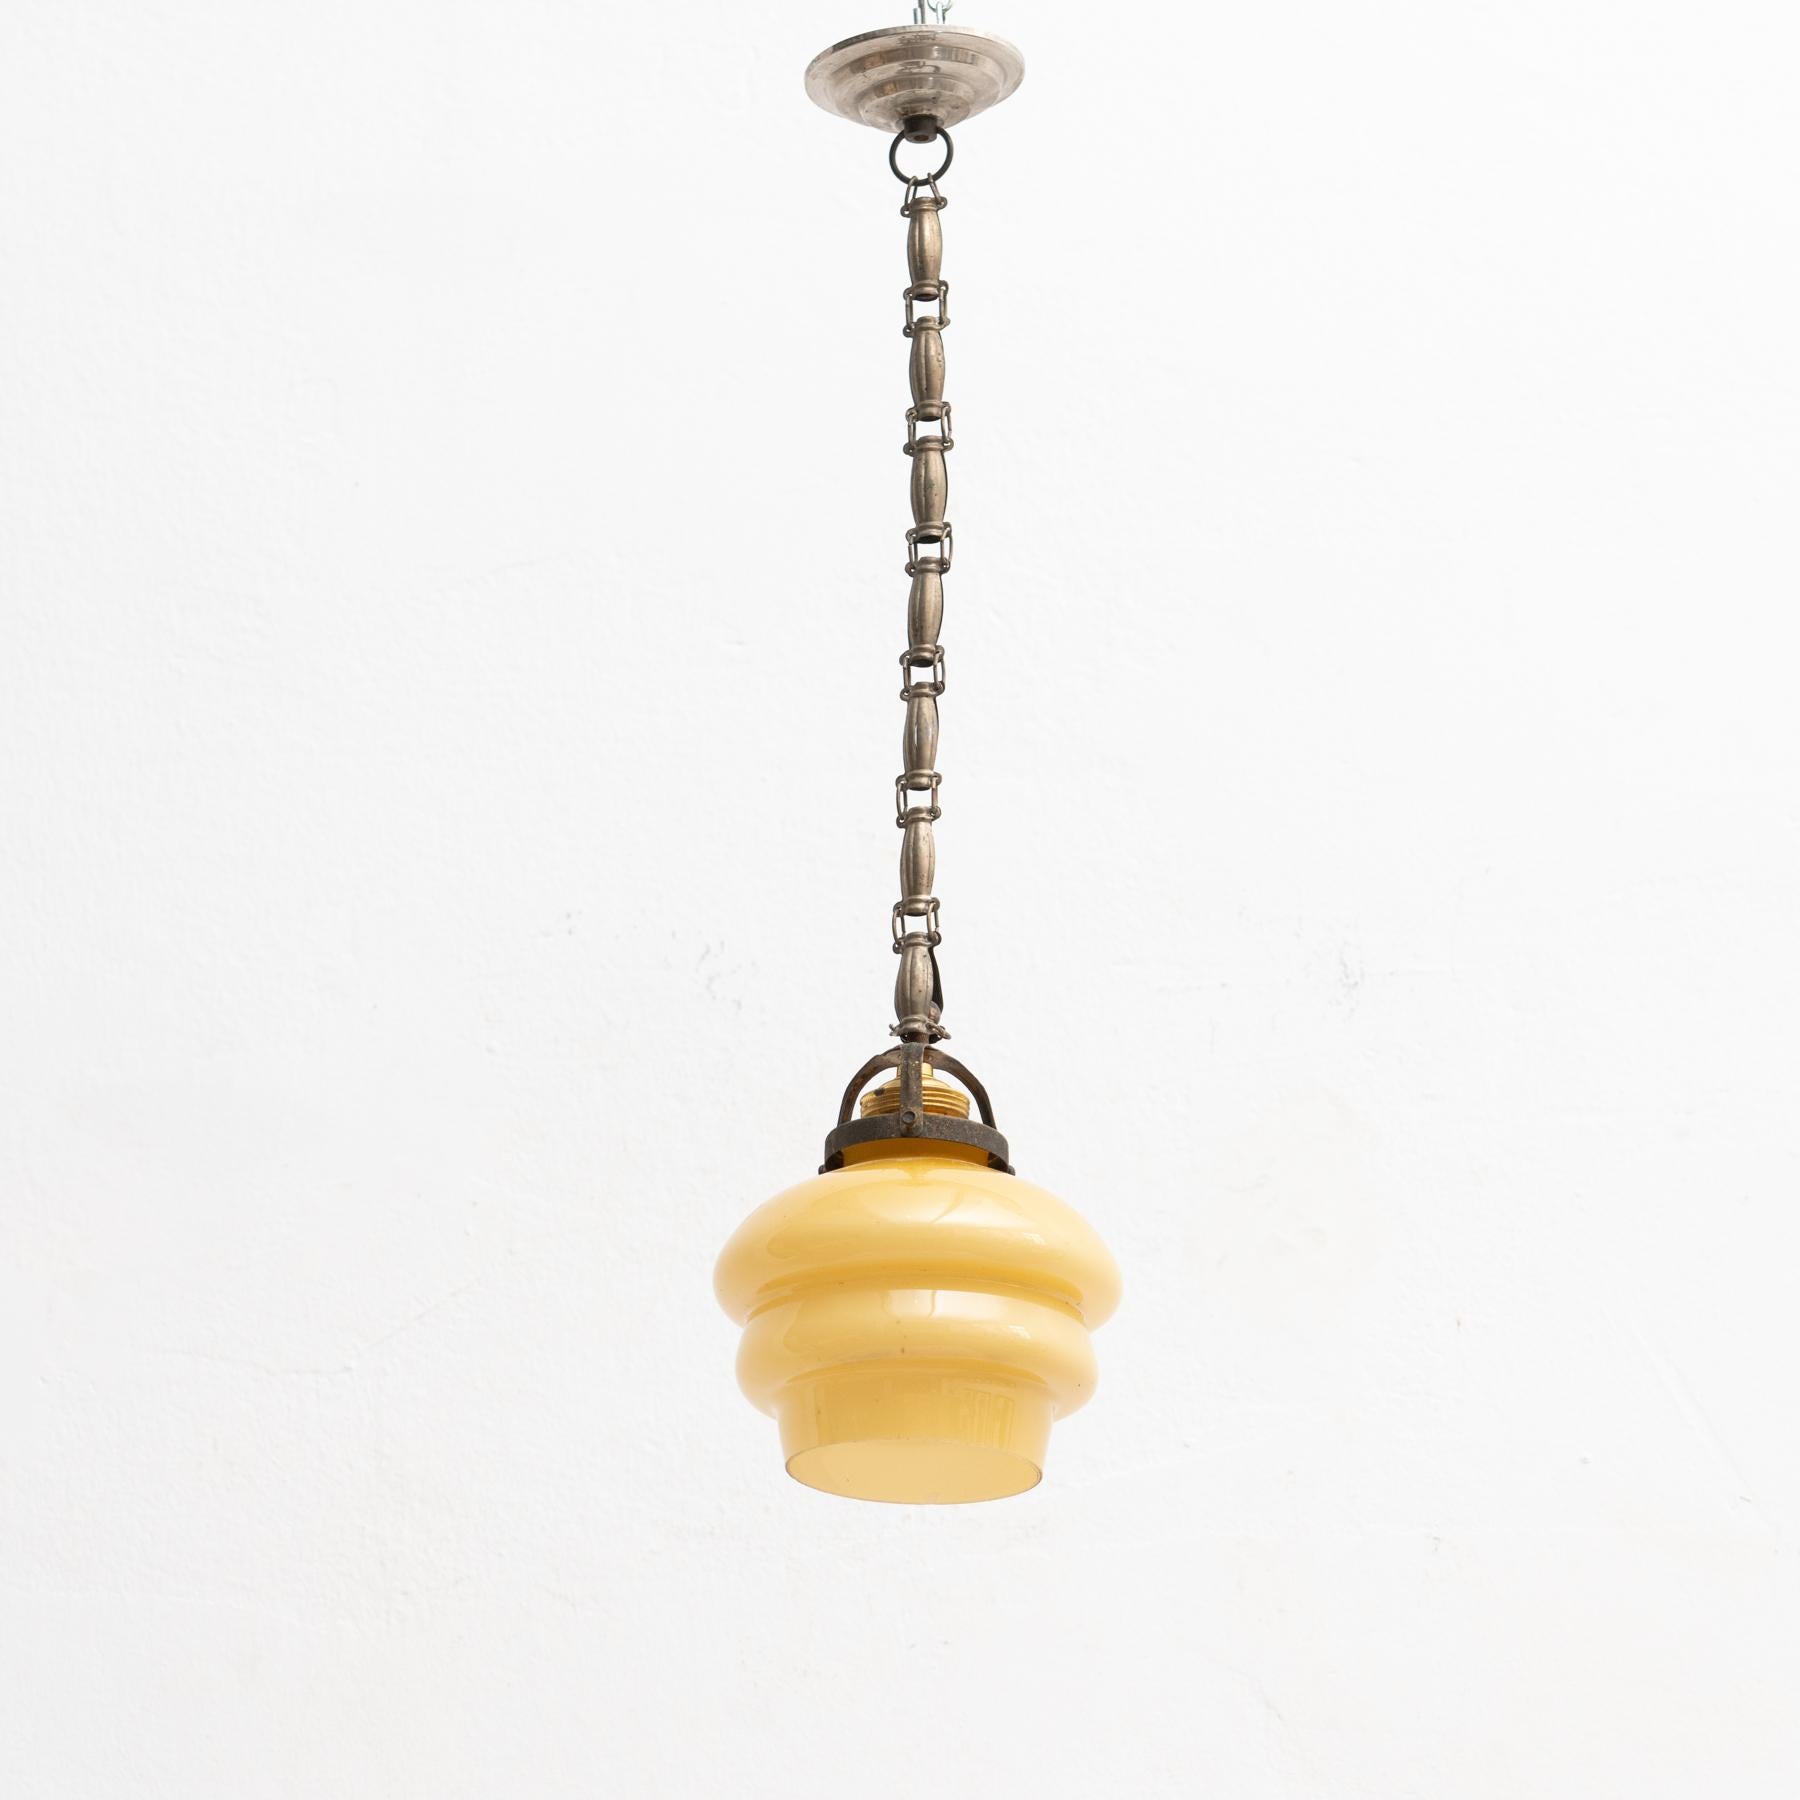 Mid-20th Century Vintage French Yellow Glass Ceiling Lamp, circa 1930